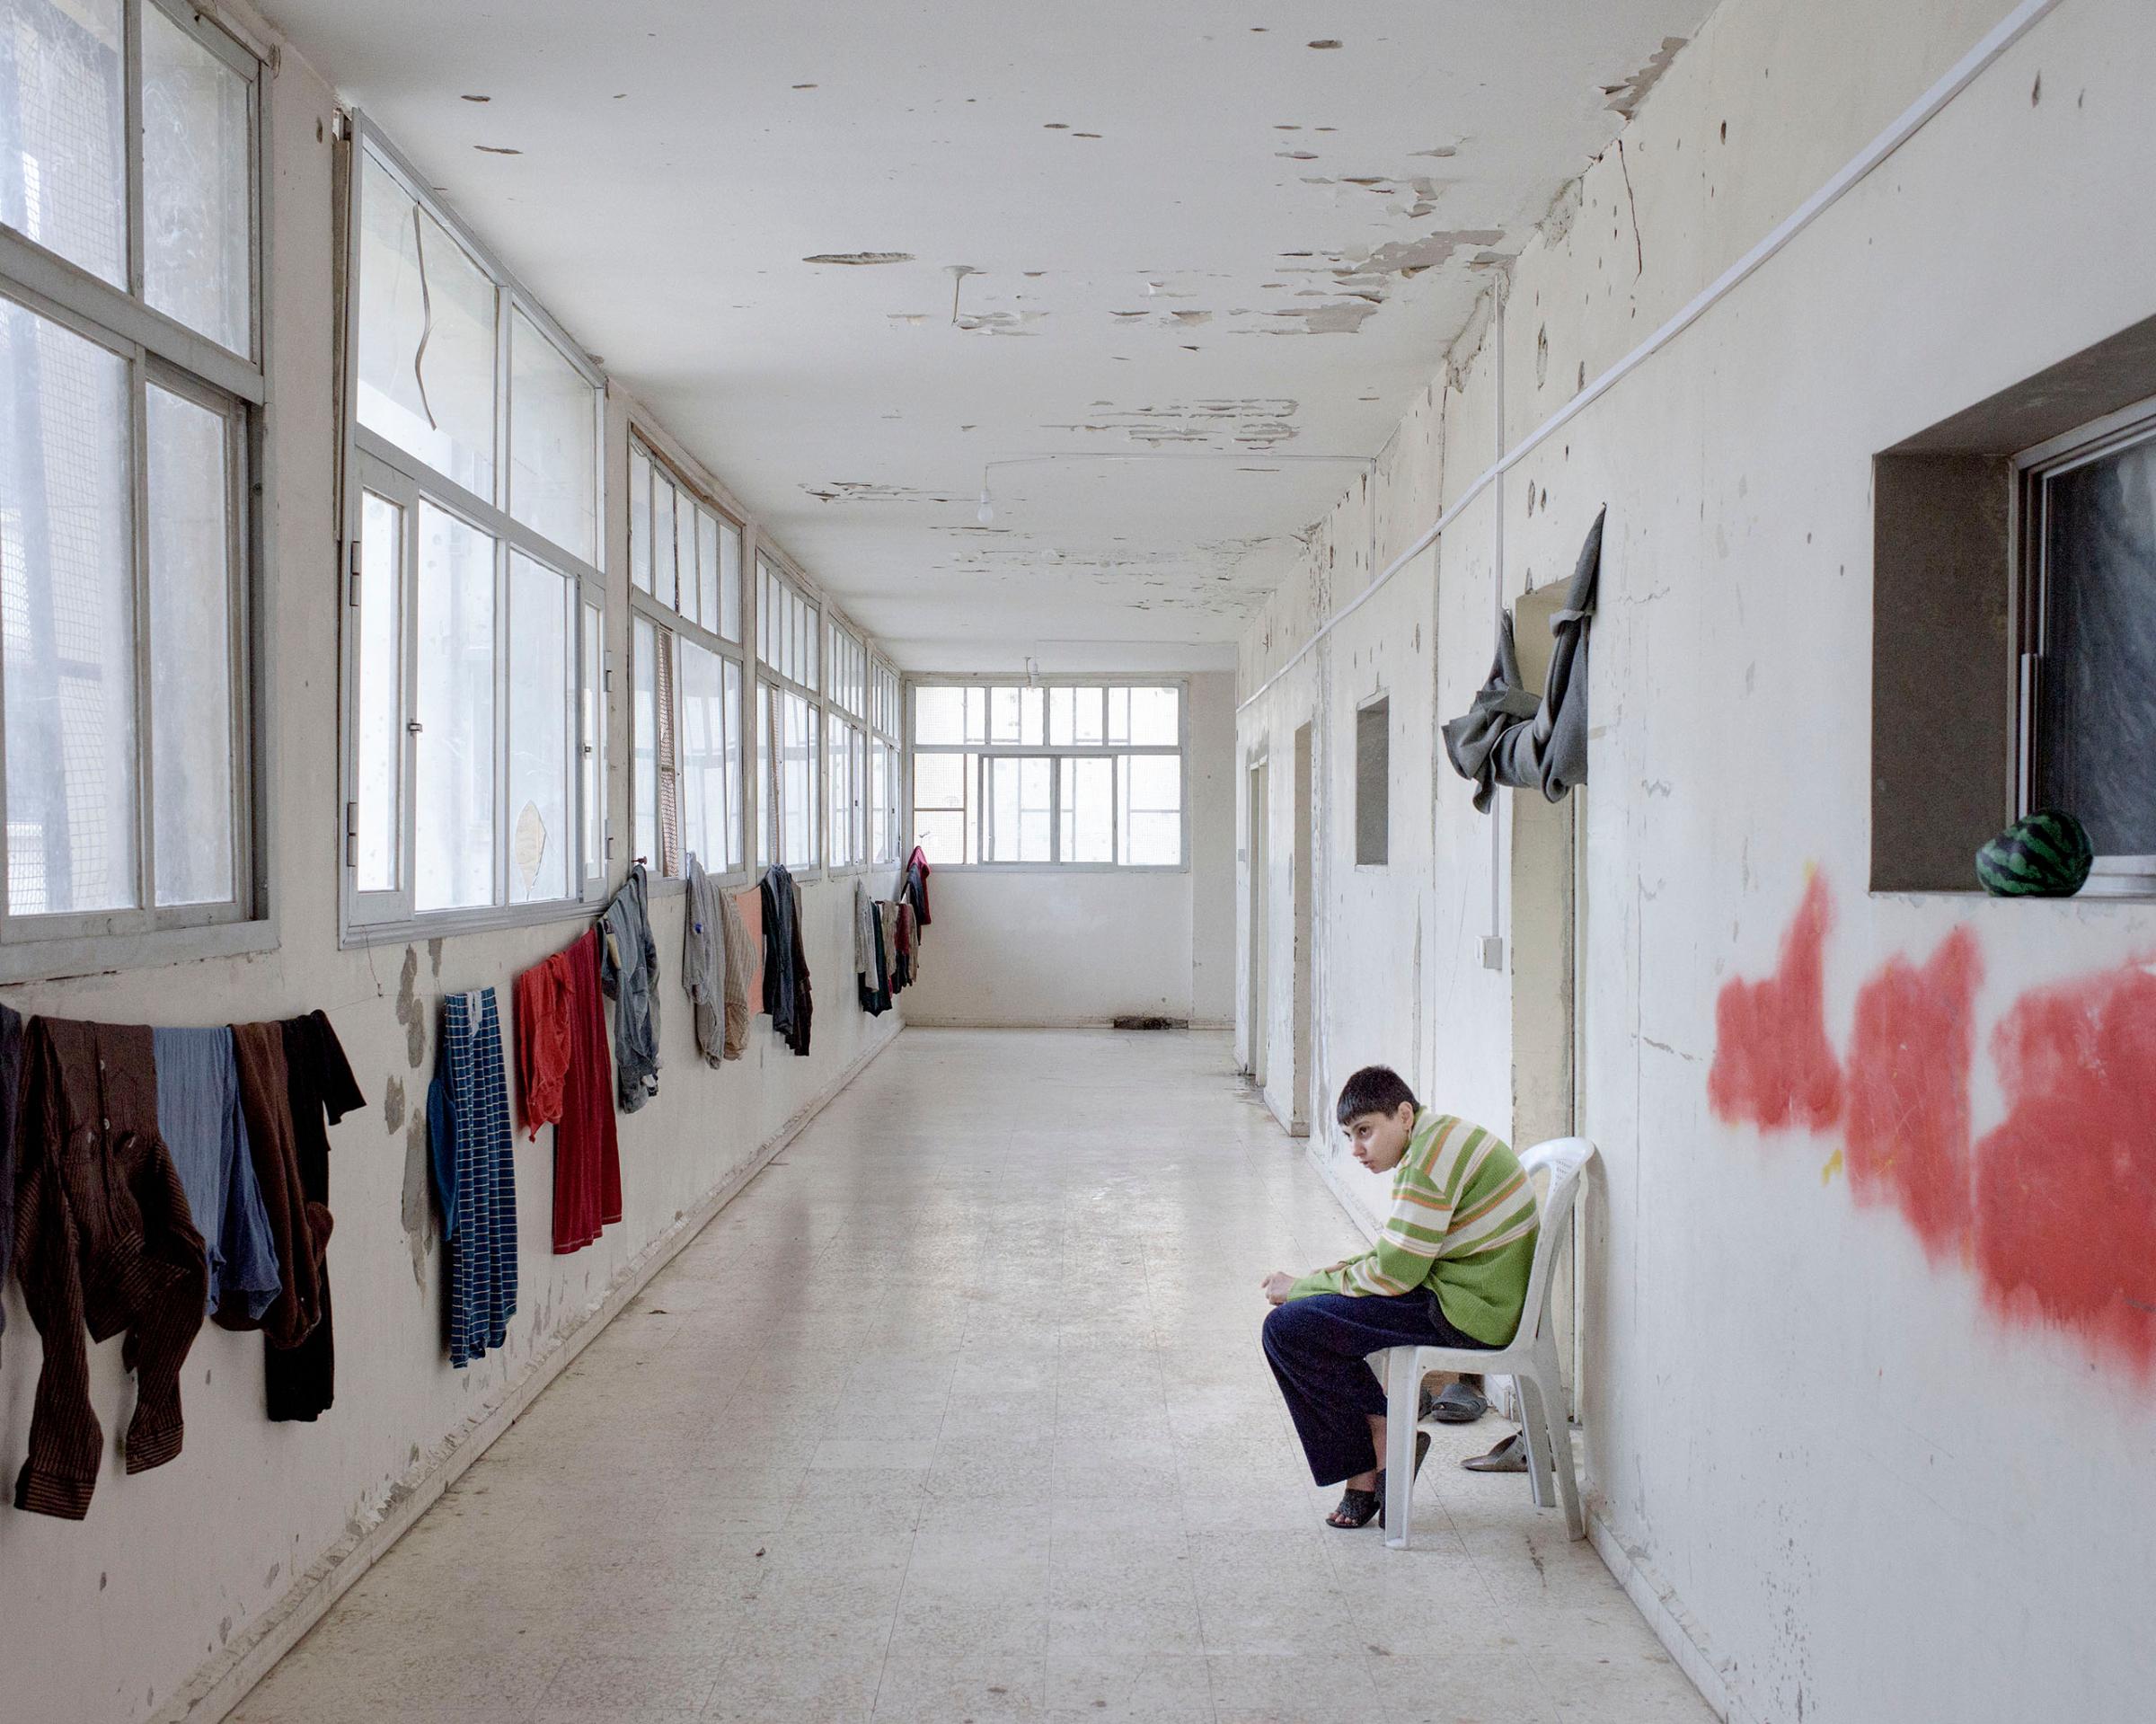 A Syrian boy sits in a hallway of a former school, now a complex used by the Syrian Arab Red Crescent to house internally displaced persons, in the Bab Amr district of Homs, Syria, March 2016.